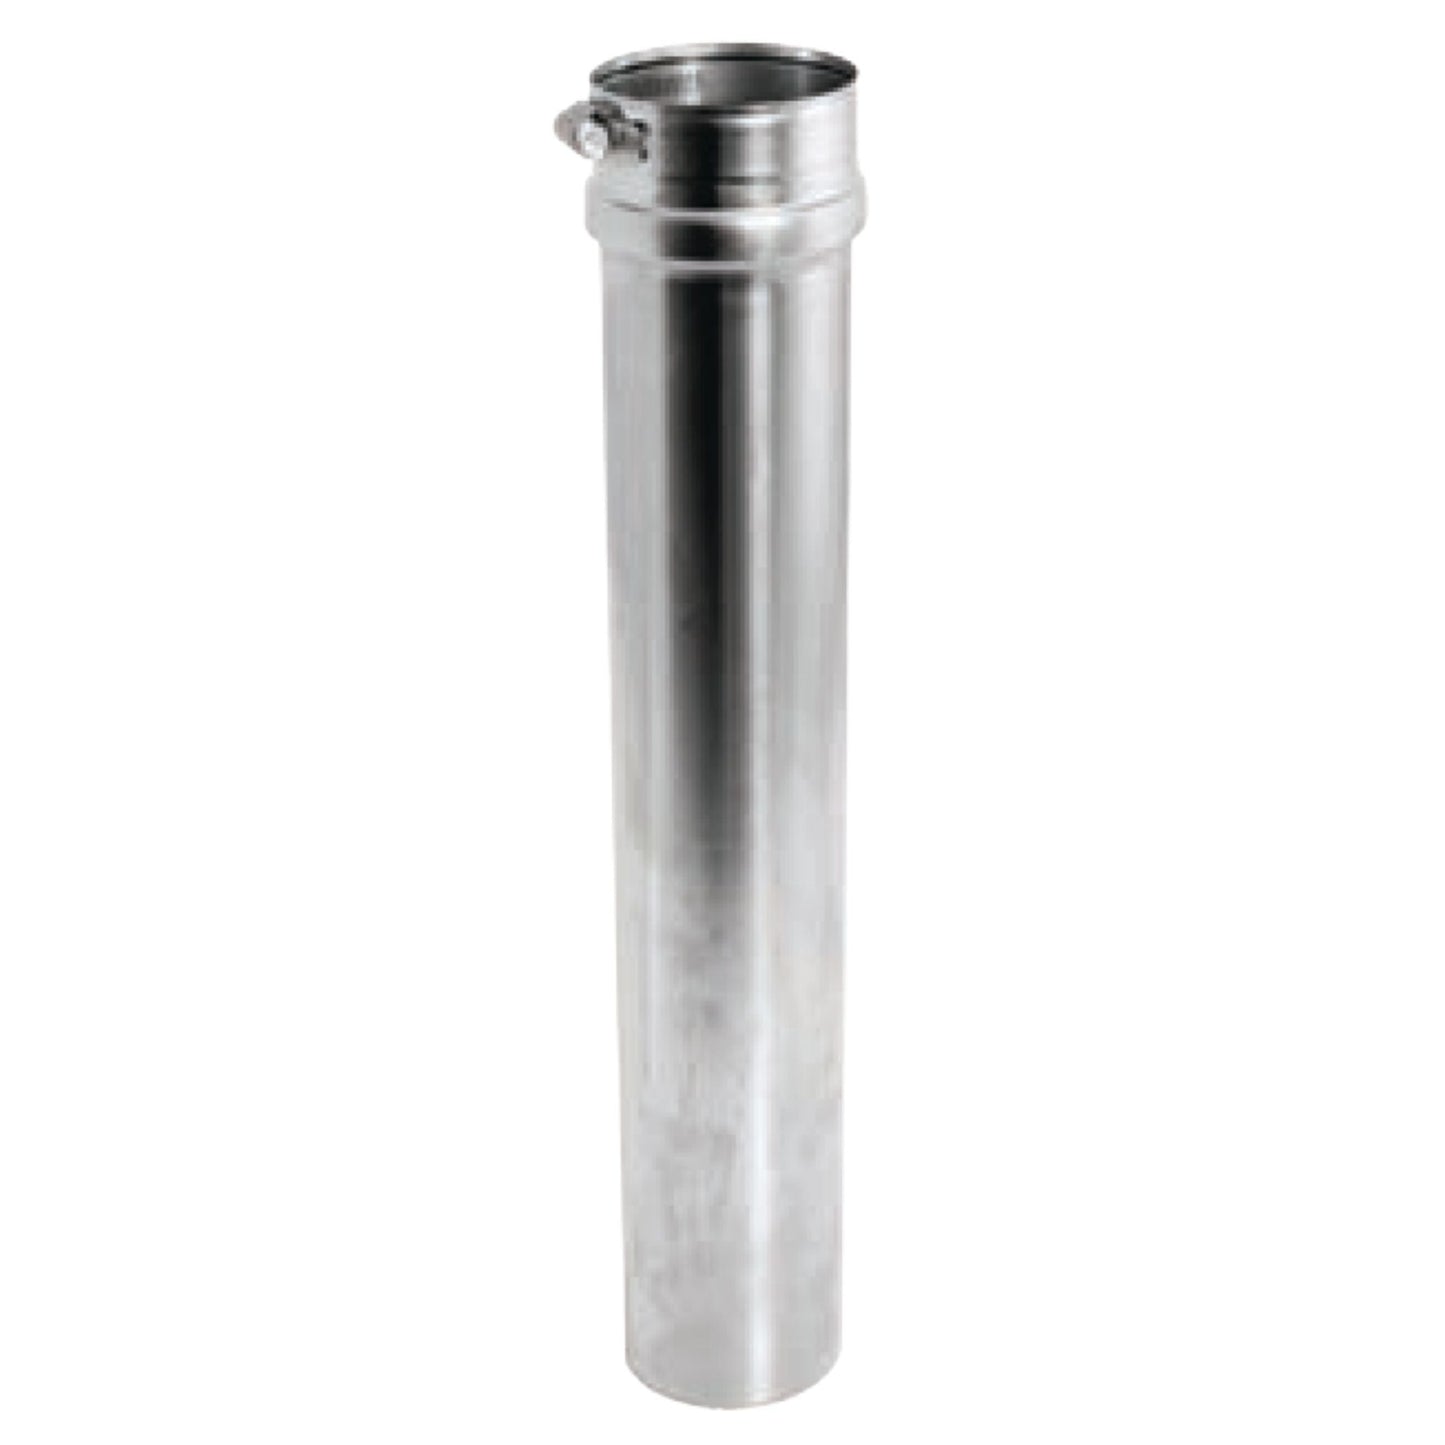 DuraVent FasNSeal 14" x 18" 29-4C Stainless Steel Adjustable Vent Length